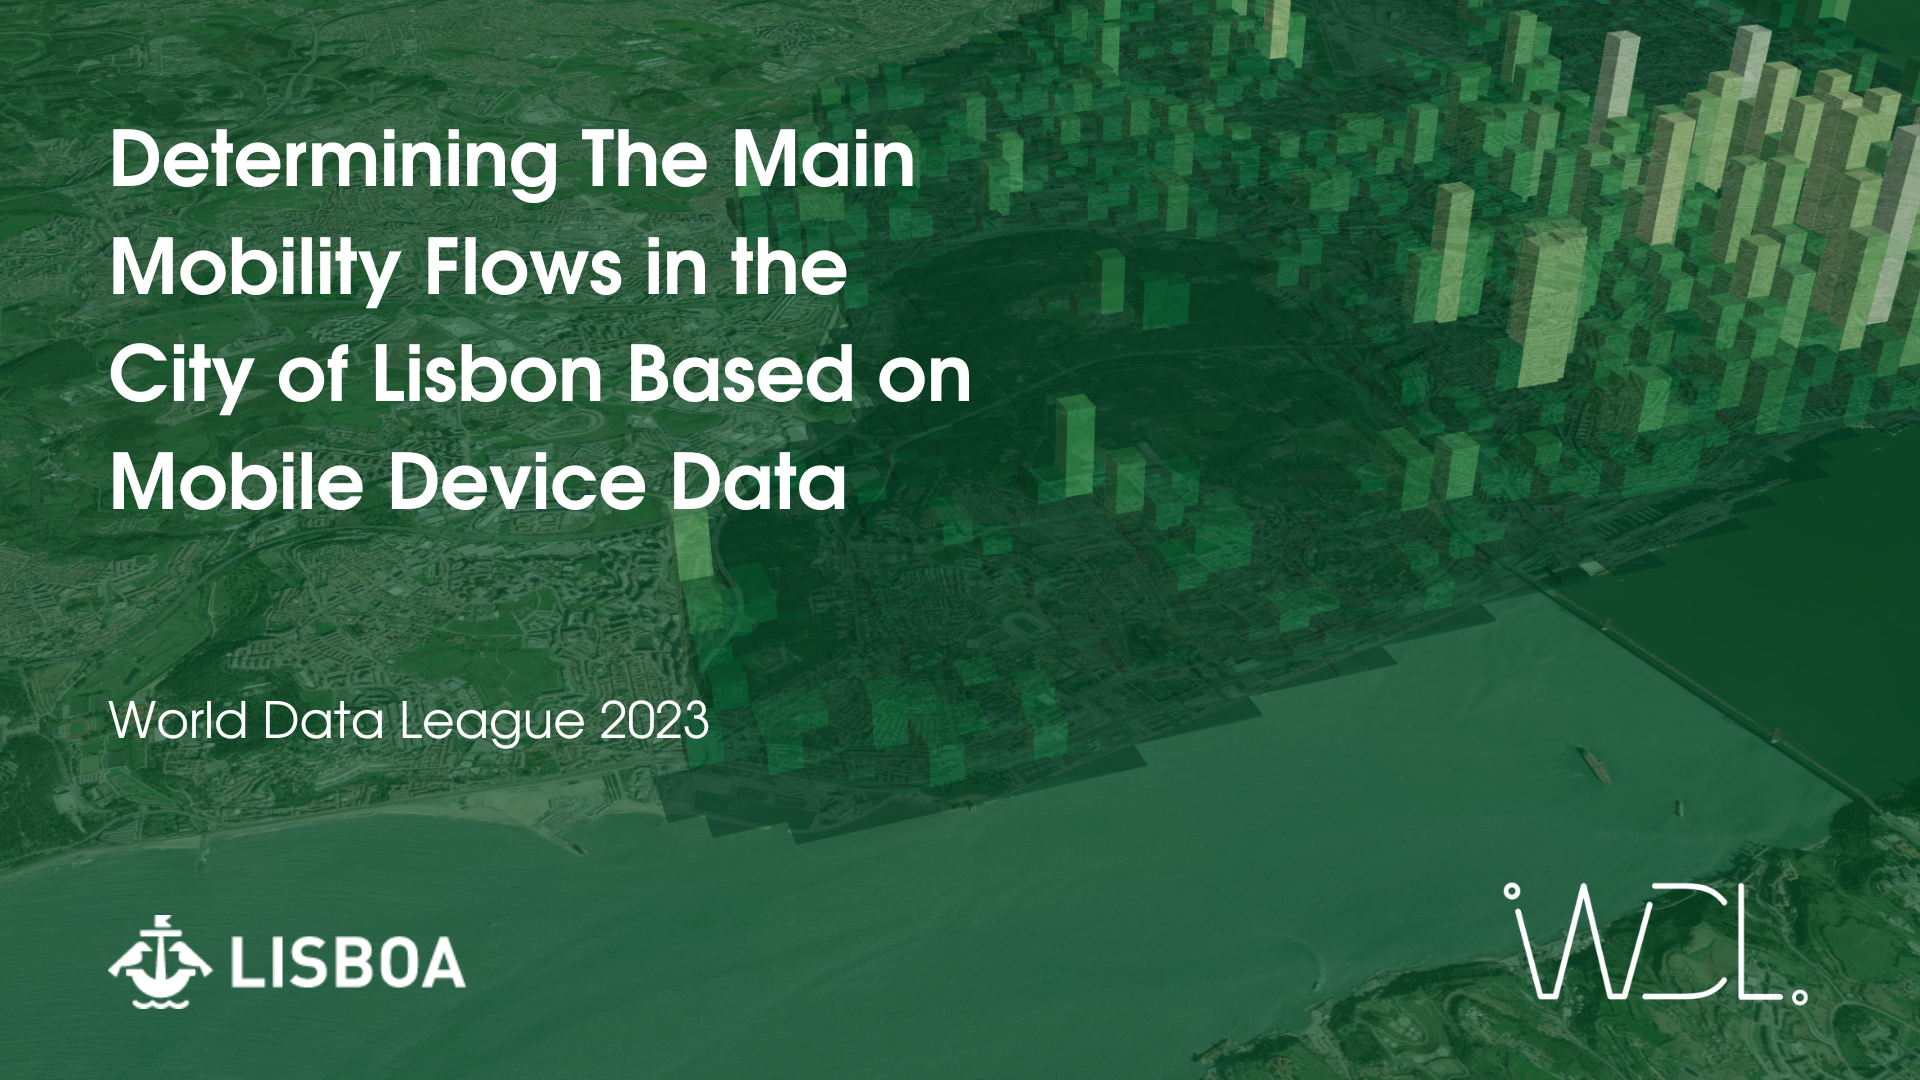 Determining The Main Mobility Flows in the City of Lisbon Based on Mobile Device Data